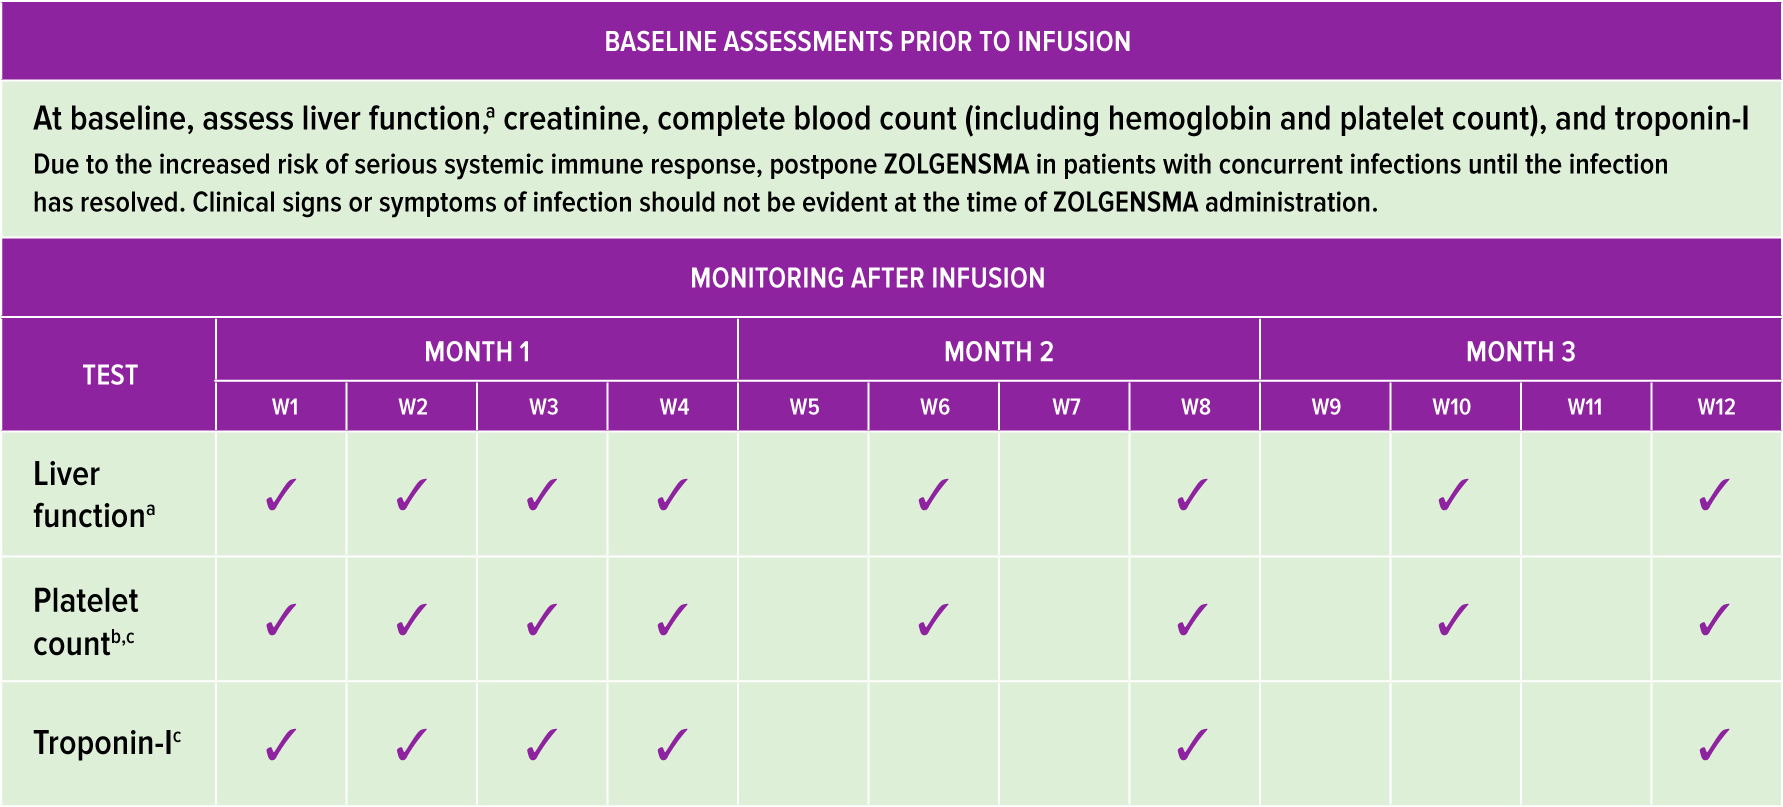 Table: Required tests to perform at baseline and after treatment with ZOLGENSMA including complete blood count, creatinine, platelet count, troponin-I, and liver function